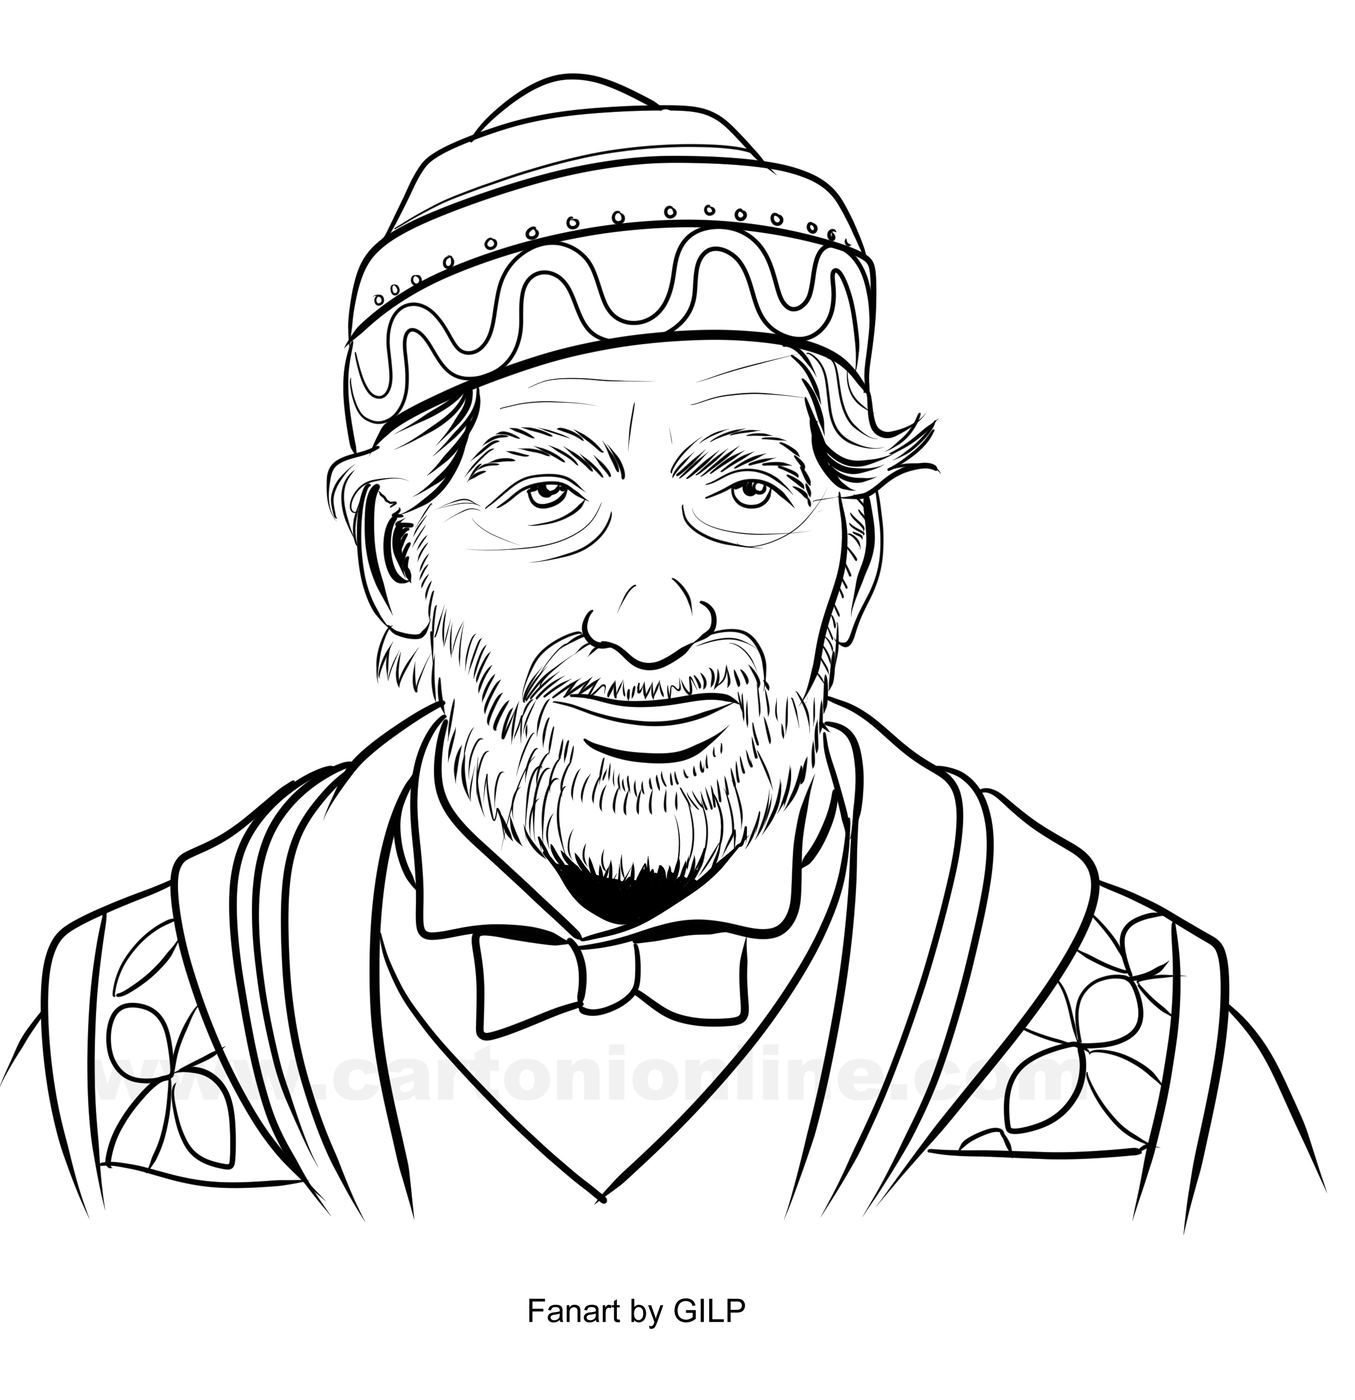 Professor Ronen Hogwarts Legacy coloring page to print and coloring